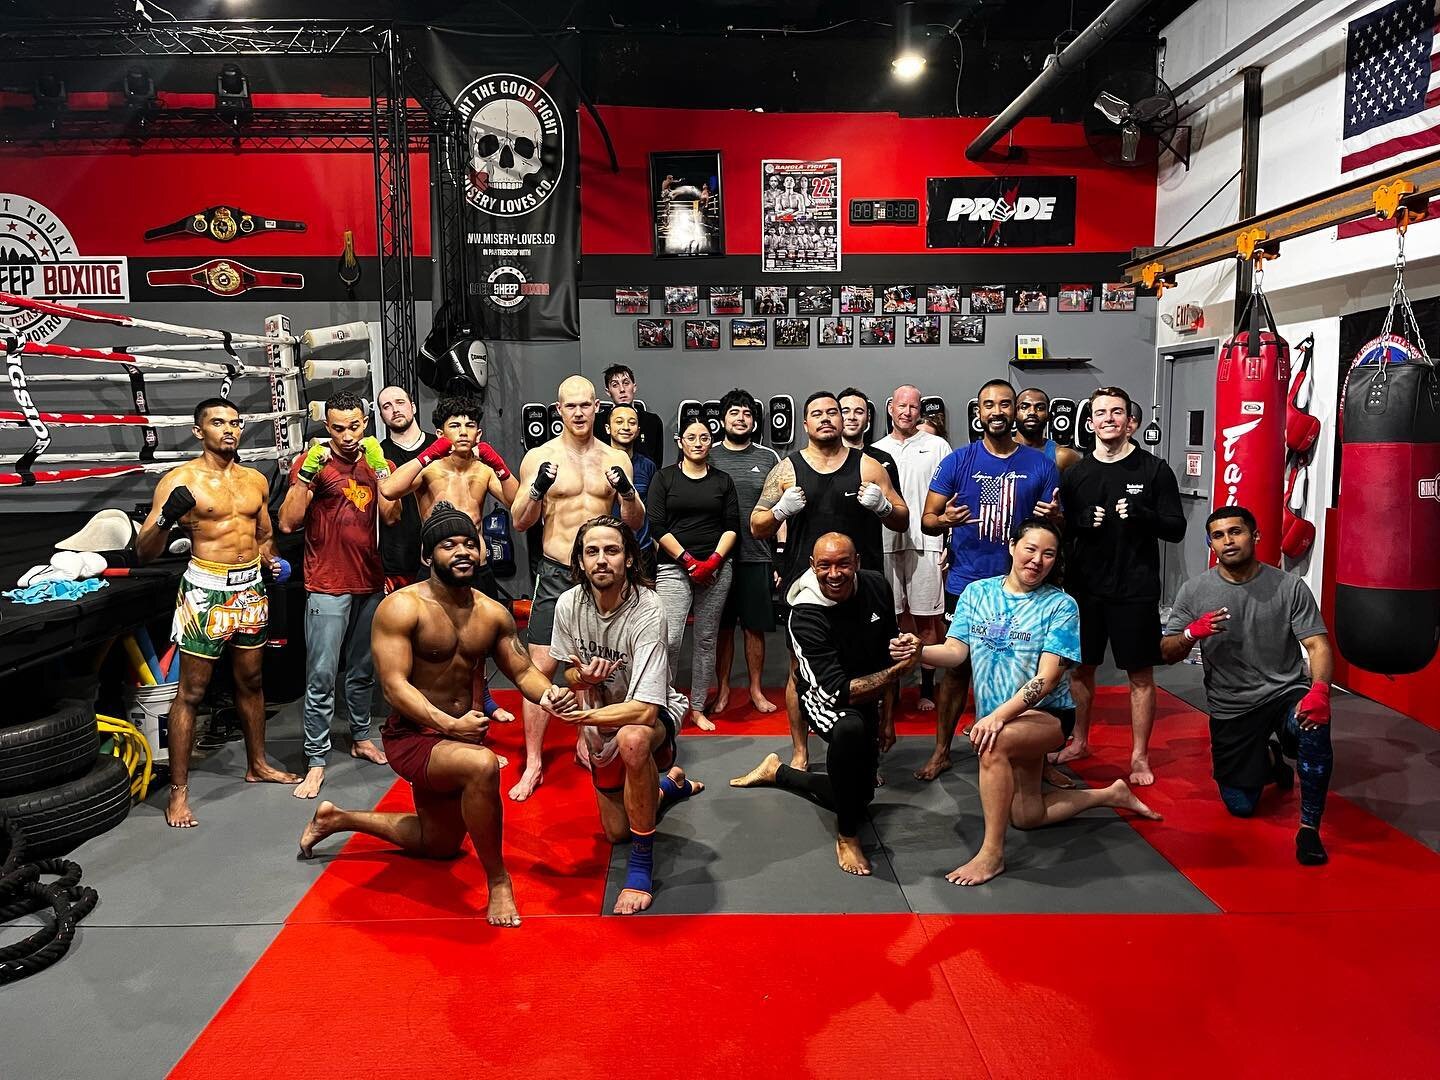 Great Muay Thai class tonight with the legend himself @bloomshine! 

Muay Thai 5 times a week! 

Shoot us a direct message for more info! 

#boxing #punch #family #fitness #competition #love #gring #work #red #black #gray #boxinggym #atxboxing #austi